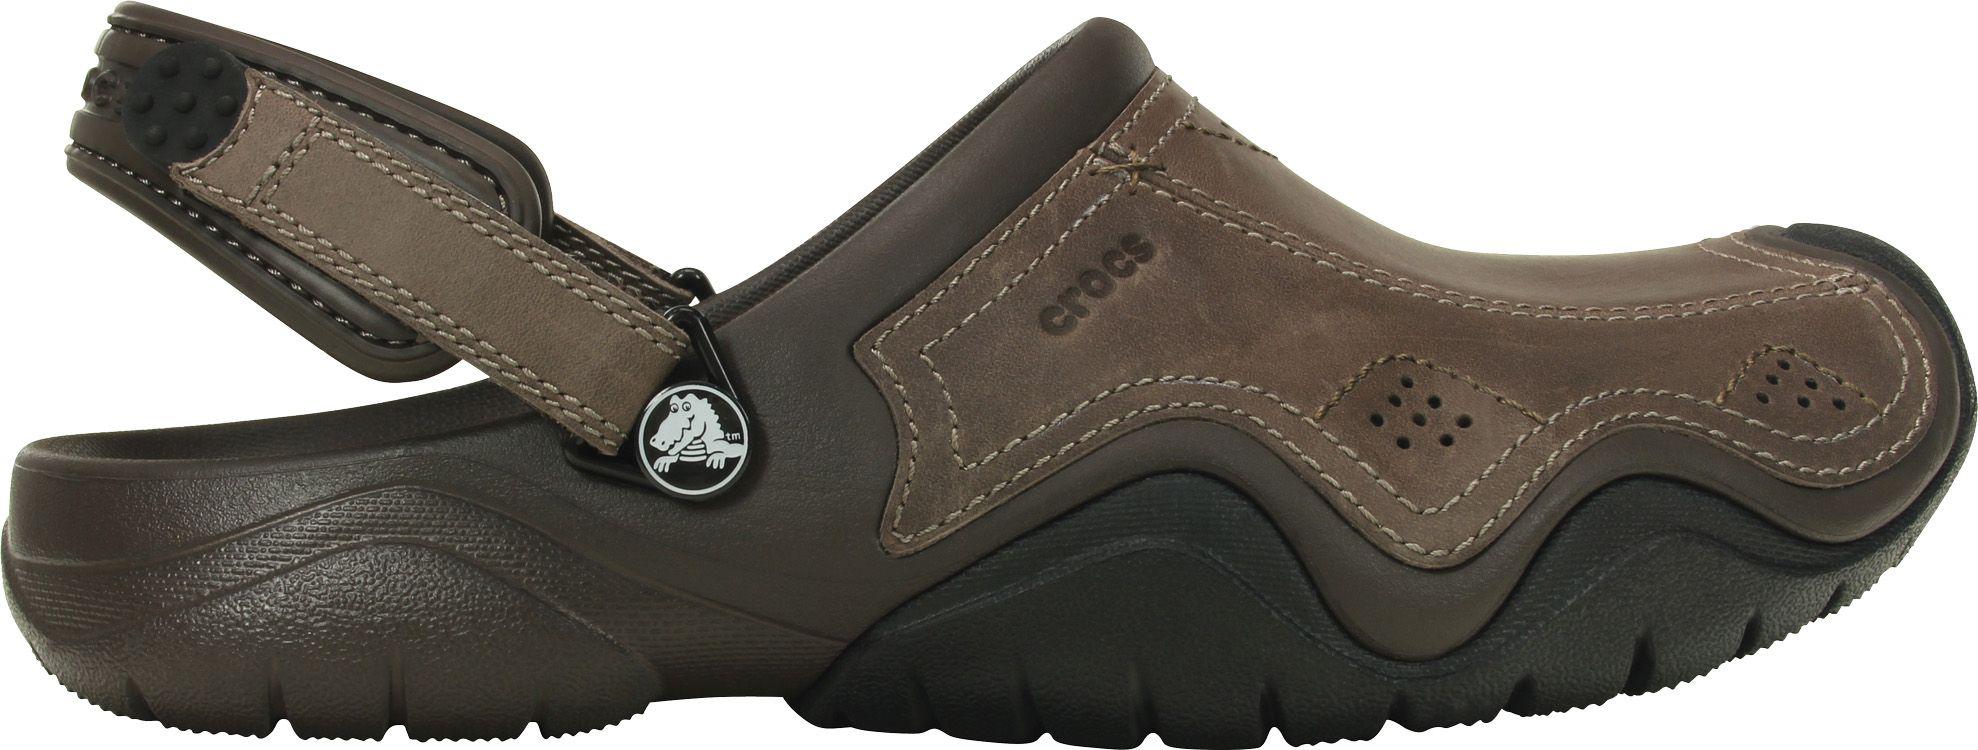 crocs men's swiftwater leather clogs